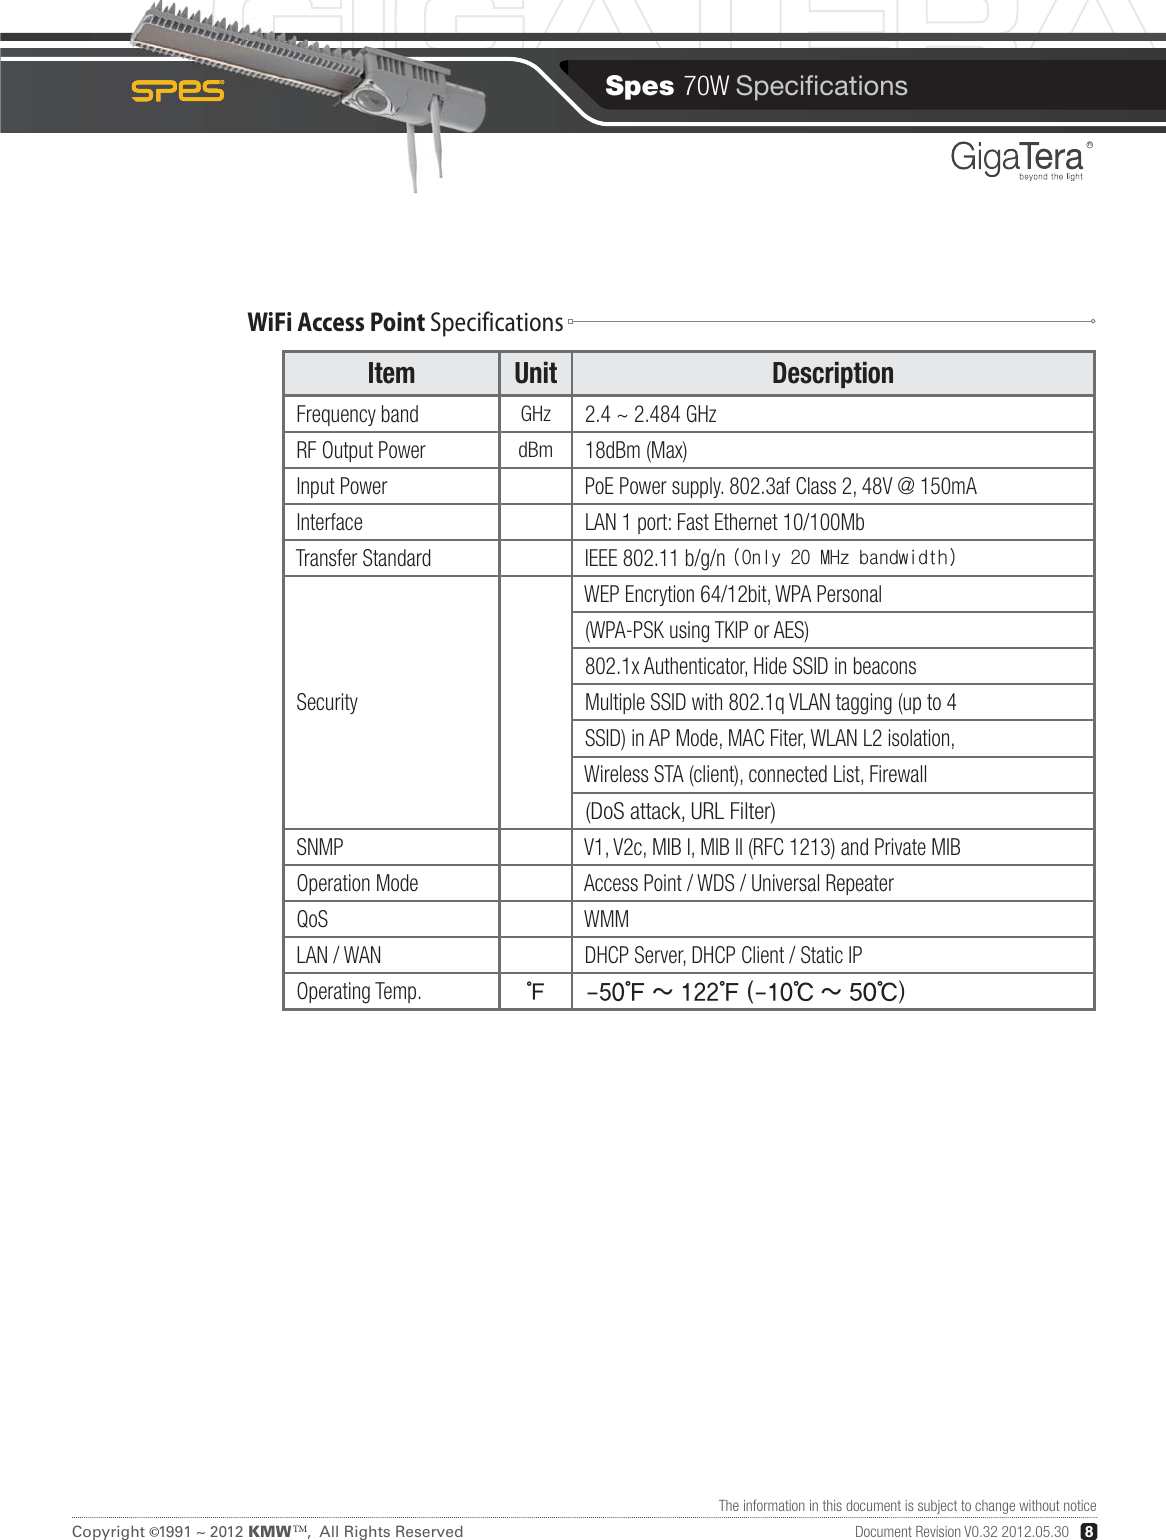 Spes 70W SpecicationsCopyright   1991 ~ 2012 KMW   ,  All Rights ReservedTM©8RDocument Revision V0.32 2012.05.30The information in this document is subject to change without noticeWiFi Access Point SpecificationsItem Unit Description Frequency bandGHz 2.4 ~ 2.484 GHz RF Output PowerdBm 18dBm (Max) Input Power  PoE Power supply. 802.3af Class 2, 48V @ 150mA Interface  LAN 1 port: Fast Ethernet 10/100Mb Transfer Standard  IEEE 802.11 b/g/n SecurityWEP Encrytion 64/12bit, WPA Personal (WPA-PSK using TKIP or AES)  802.1x Authenticator, Hide SSID in beacons Multiple SSID with 802.1q VLAN tagging (up to 4         SSID) in AP Mode, MAC Fiter, WLAN L2 isolation,Wireless STA (client), connected List, Firewall (DoS attack, URL Filter) SNMP V1, V2c, MIB I, MIB II (RFC 1213) and Private MIB Operation Mode  Access Point / WDS / Universal Repeater  QoS WMM LAN / WAN  DHCP Server, DHCP Client / Static IP Operating Temp.